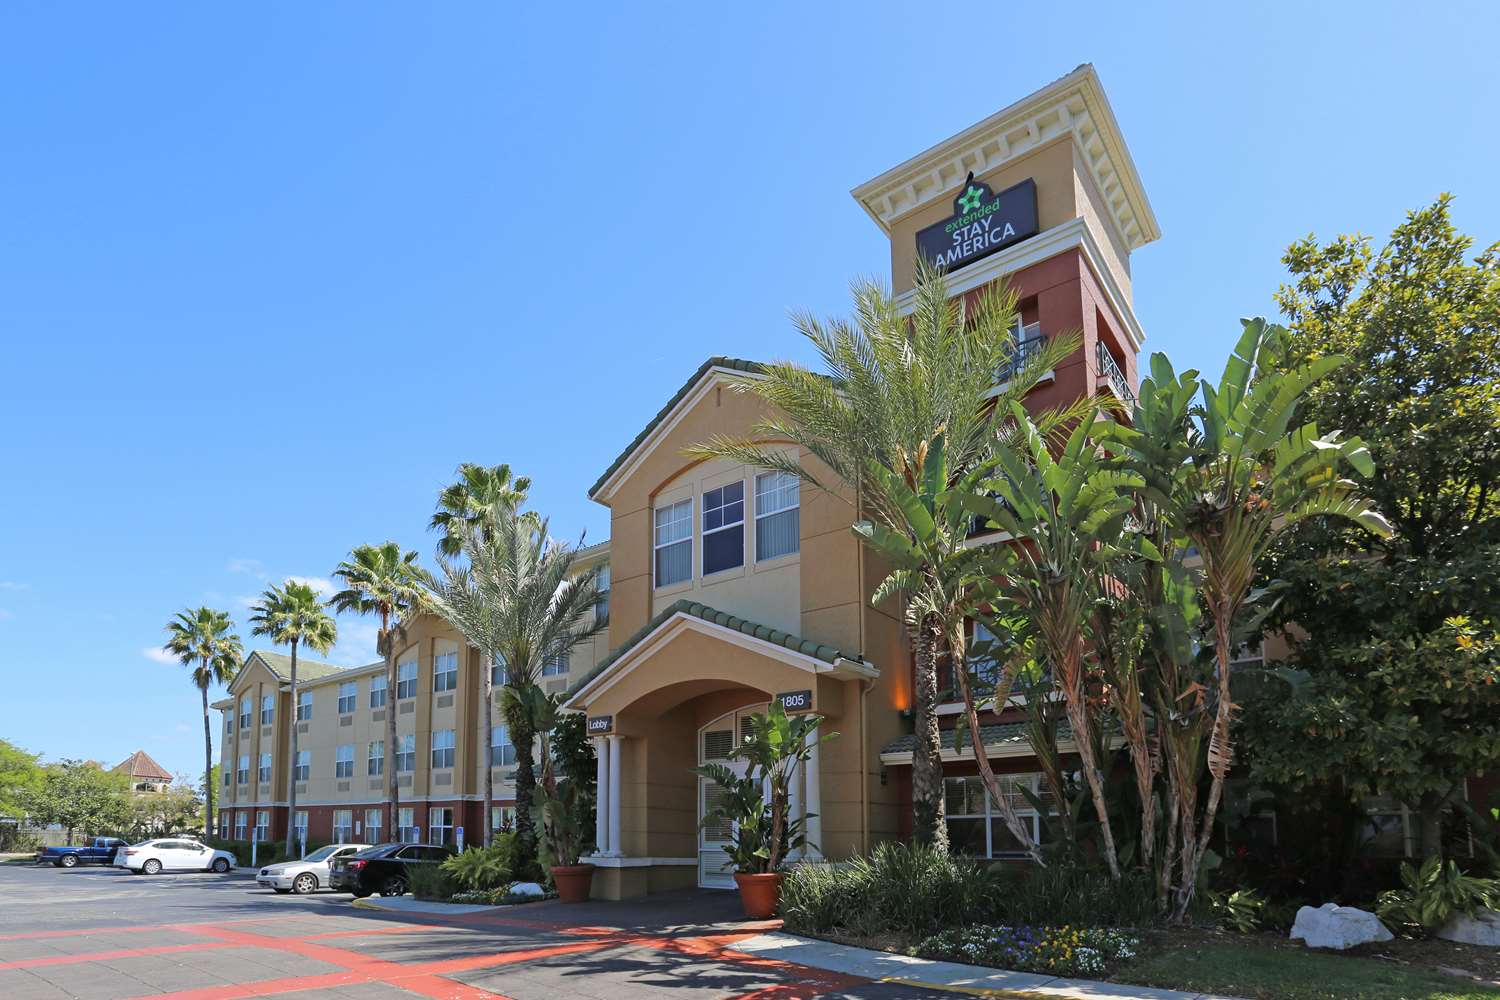 Pet Friendly Extended Stay America - Tampa - Airport - N. Westshore Blvd. in Tampa, Florida